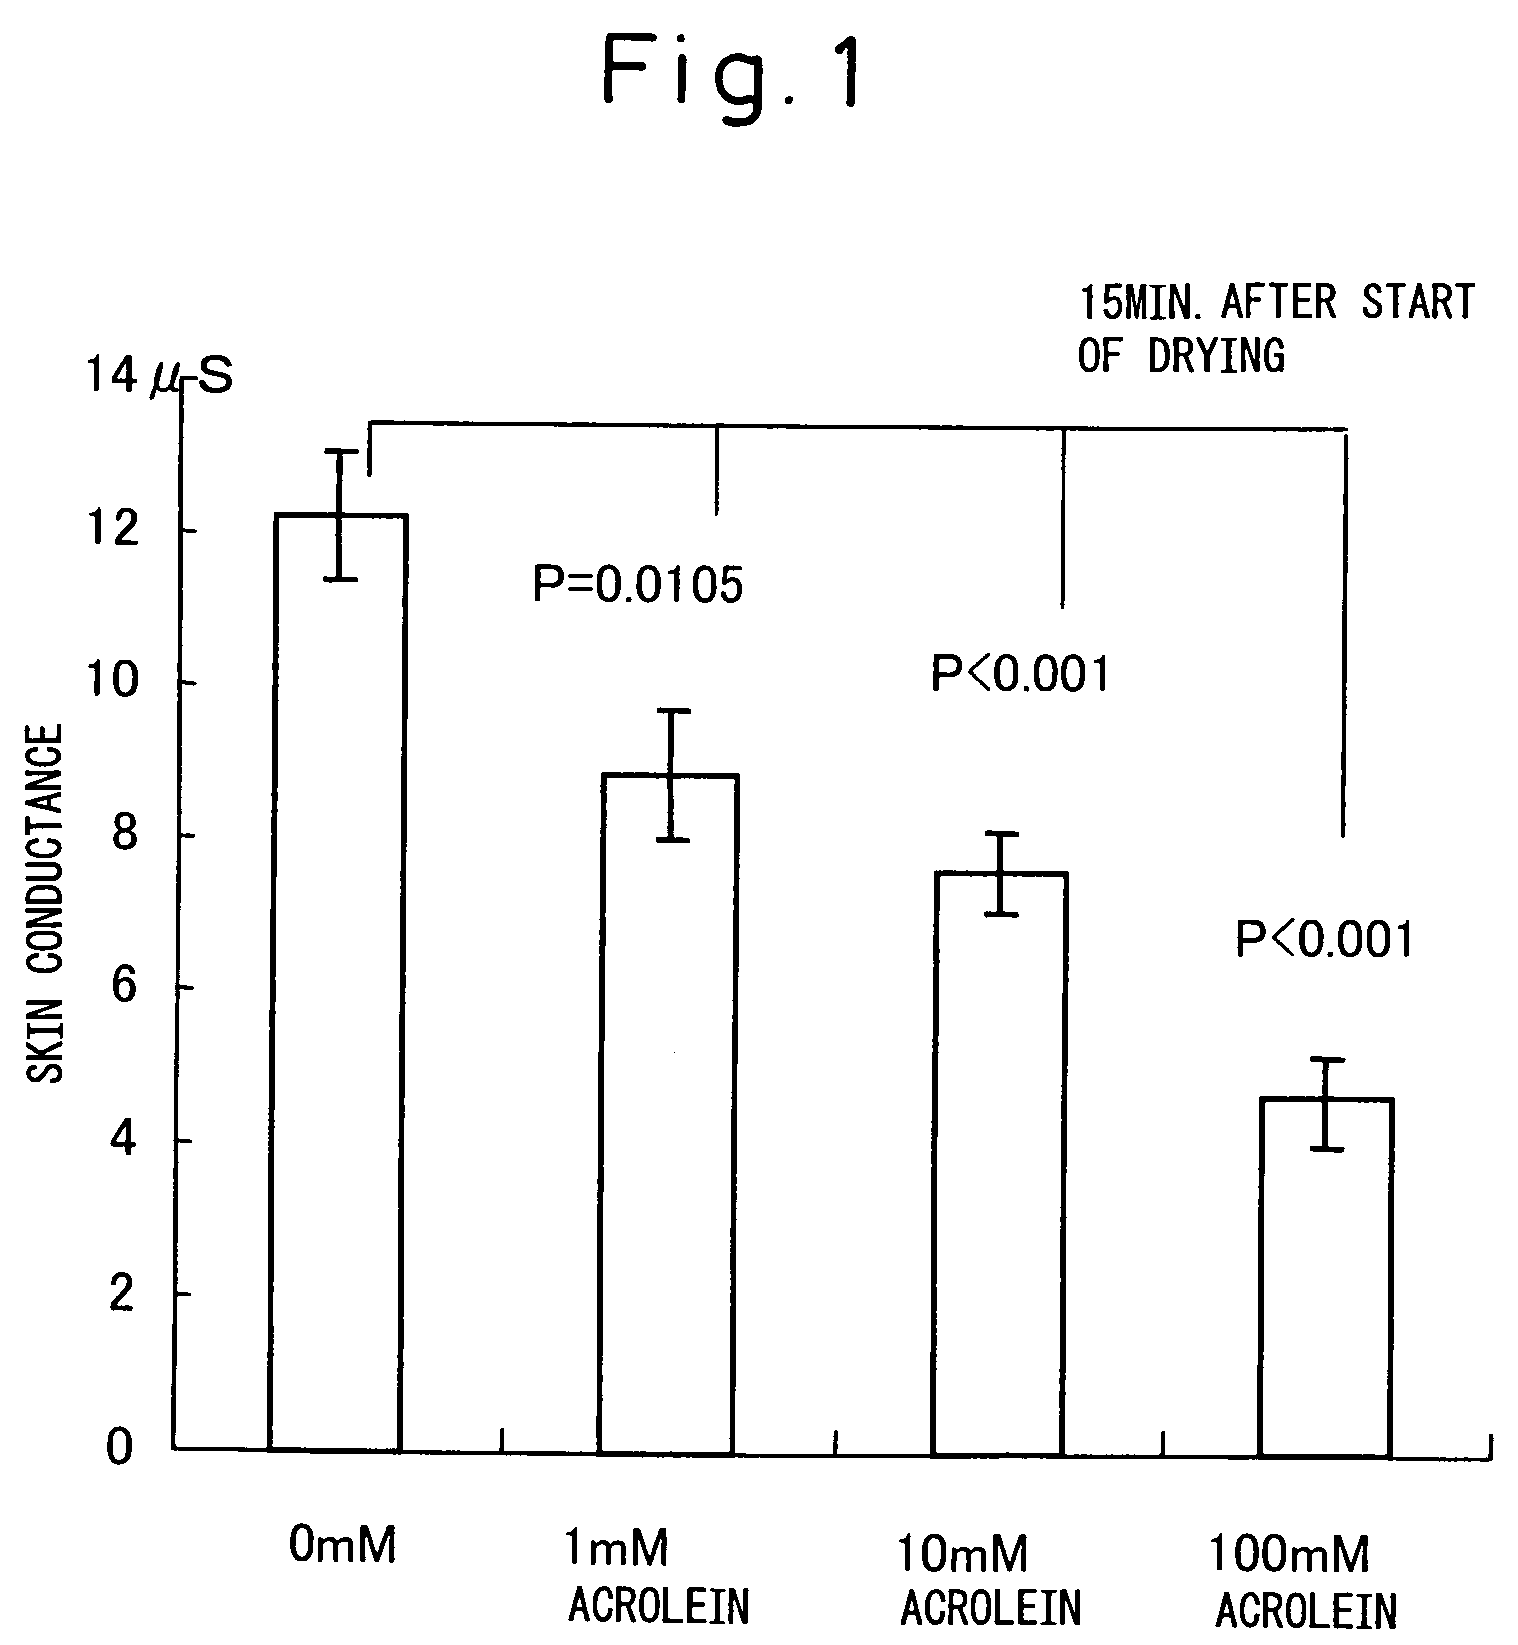 Method for determining the degree of protein oxidation in a skin sample using oxidized protein in stratum corneum as an indicator